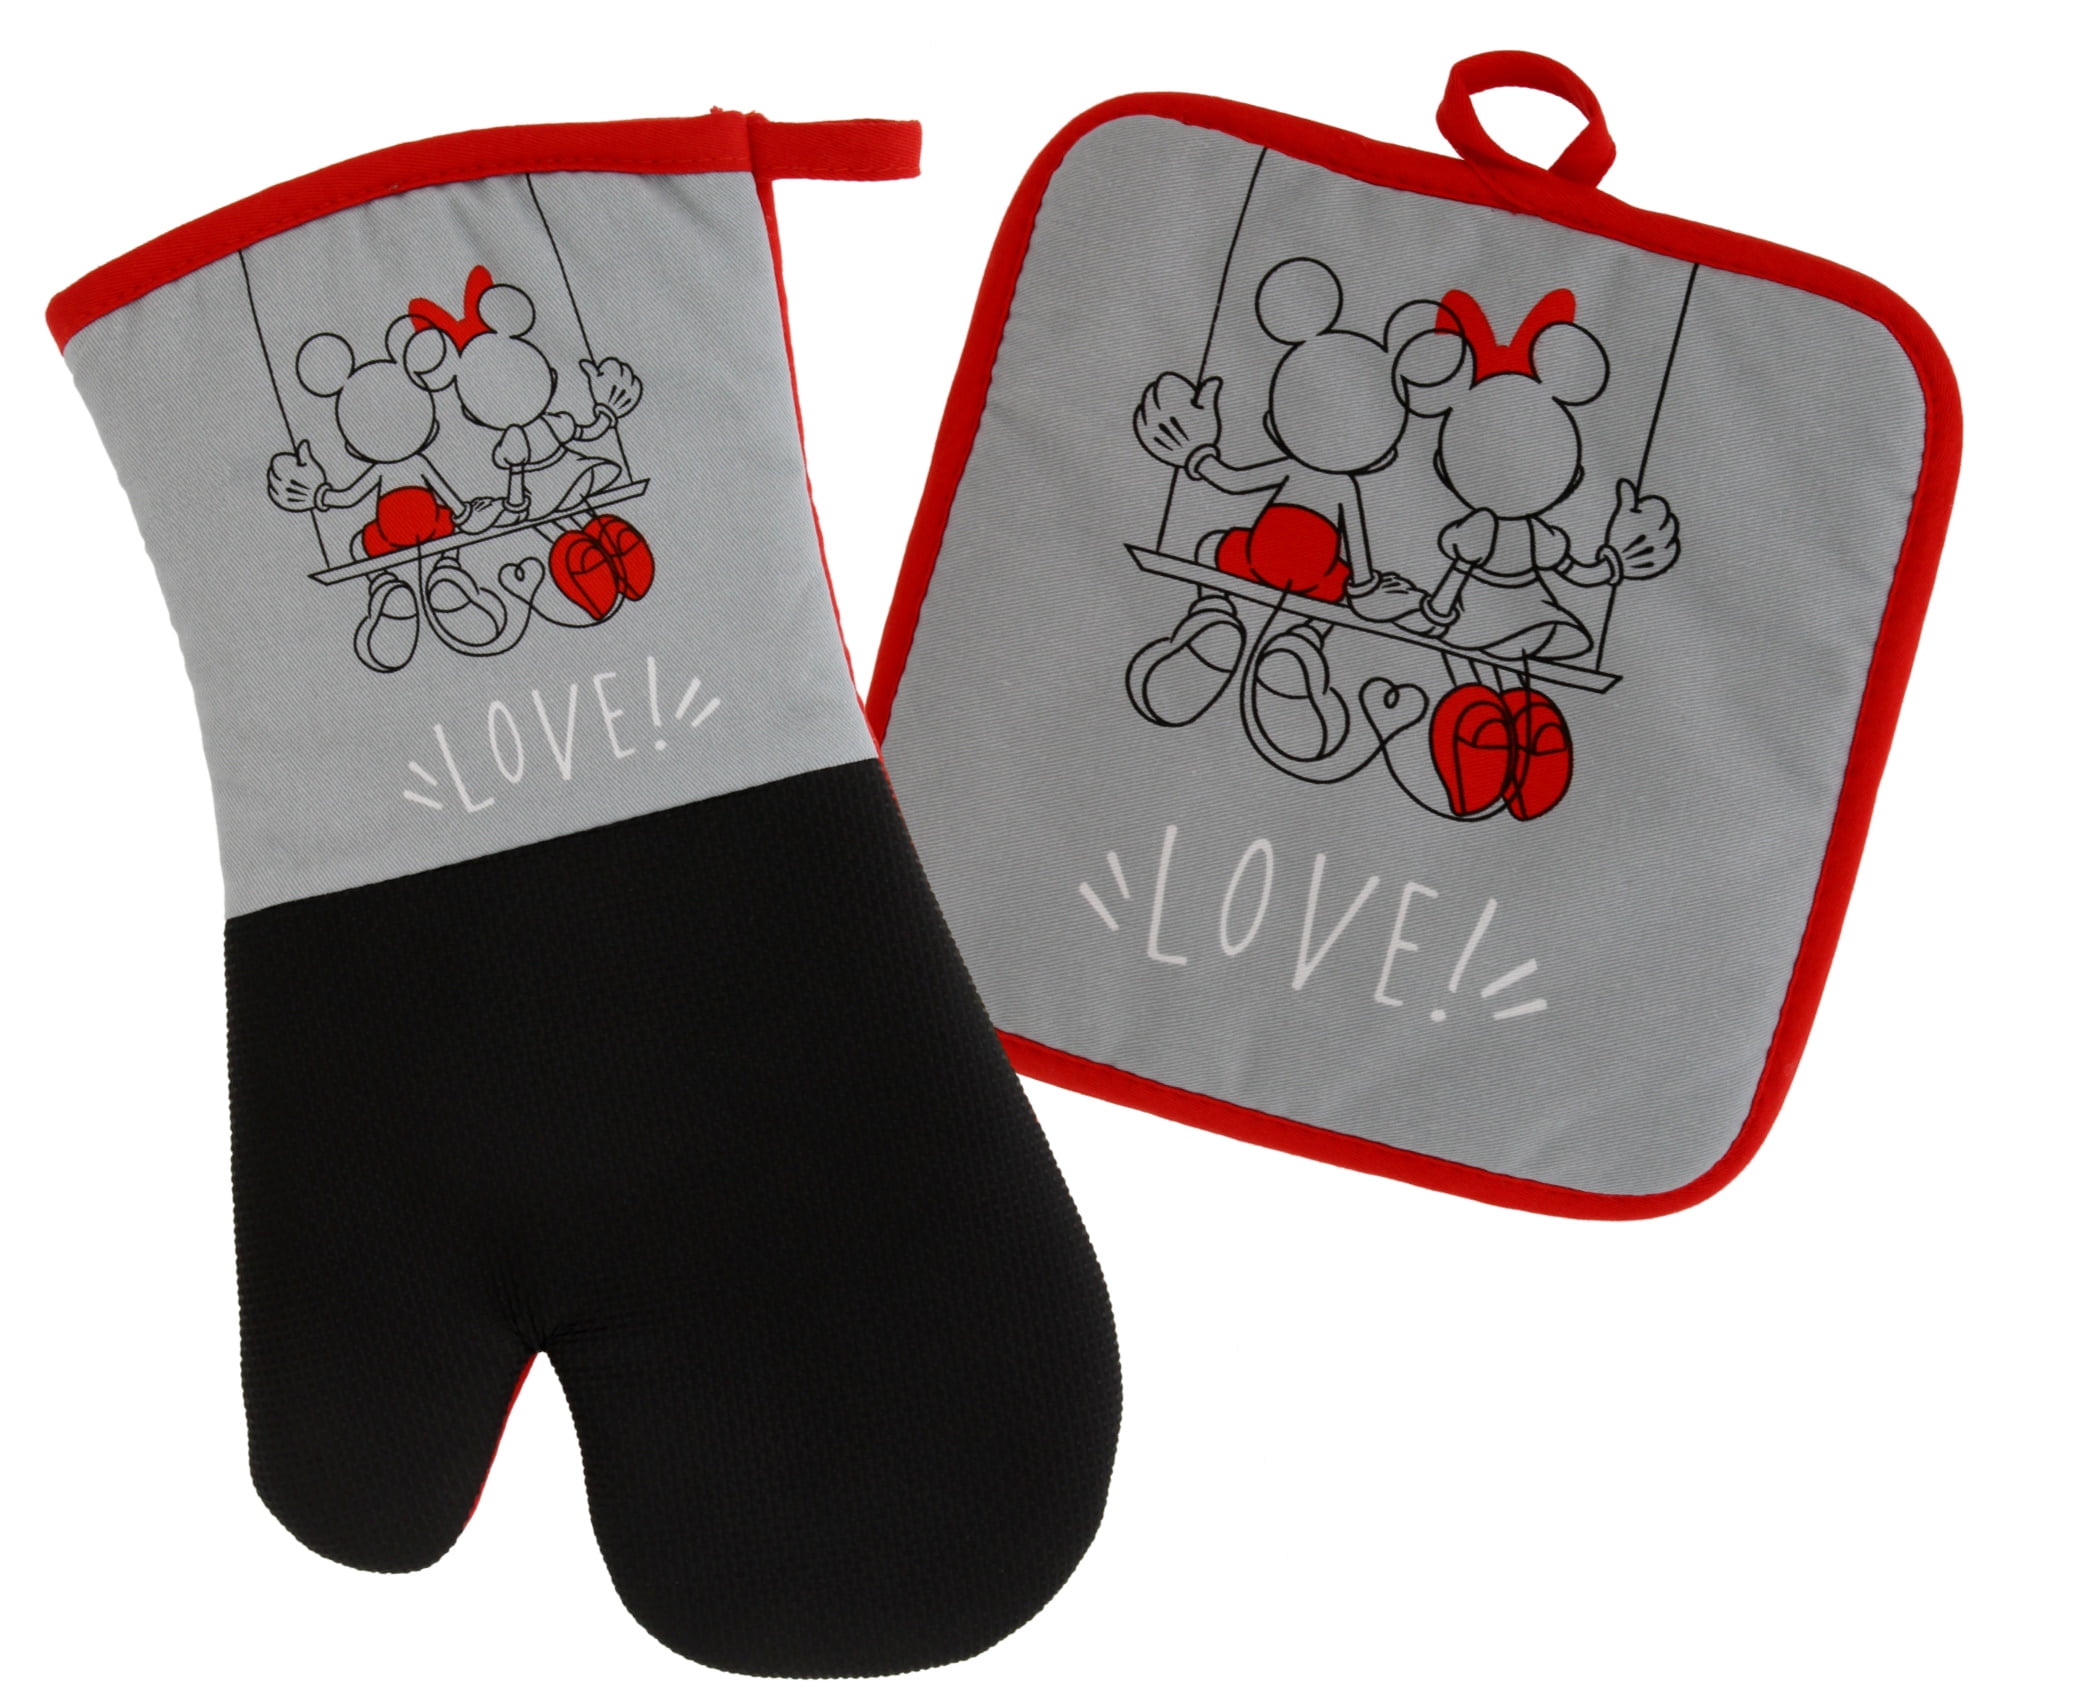 Mickey and Minnie Swing Non-Slip Heat Resistant Kitchen Accessories with Premium Insulation Ideal for Handling Hot Kitchenware Disney Kitchen Neoprene Oven Mitt and Potholder Set with Hanging Loop